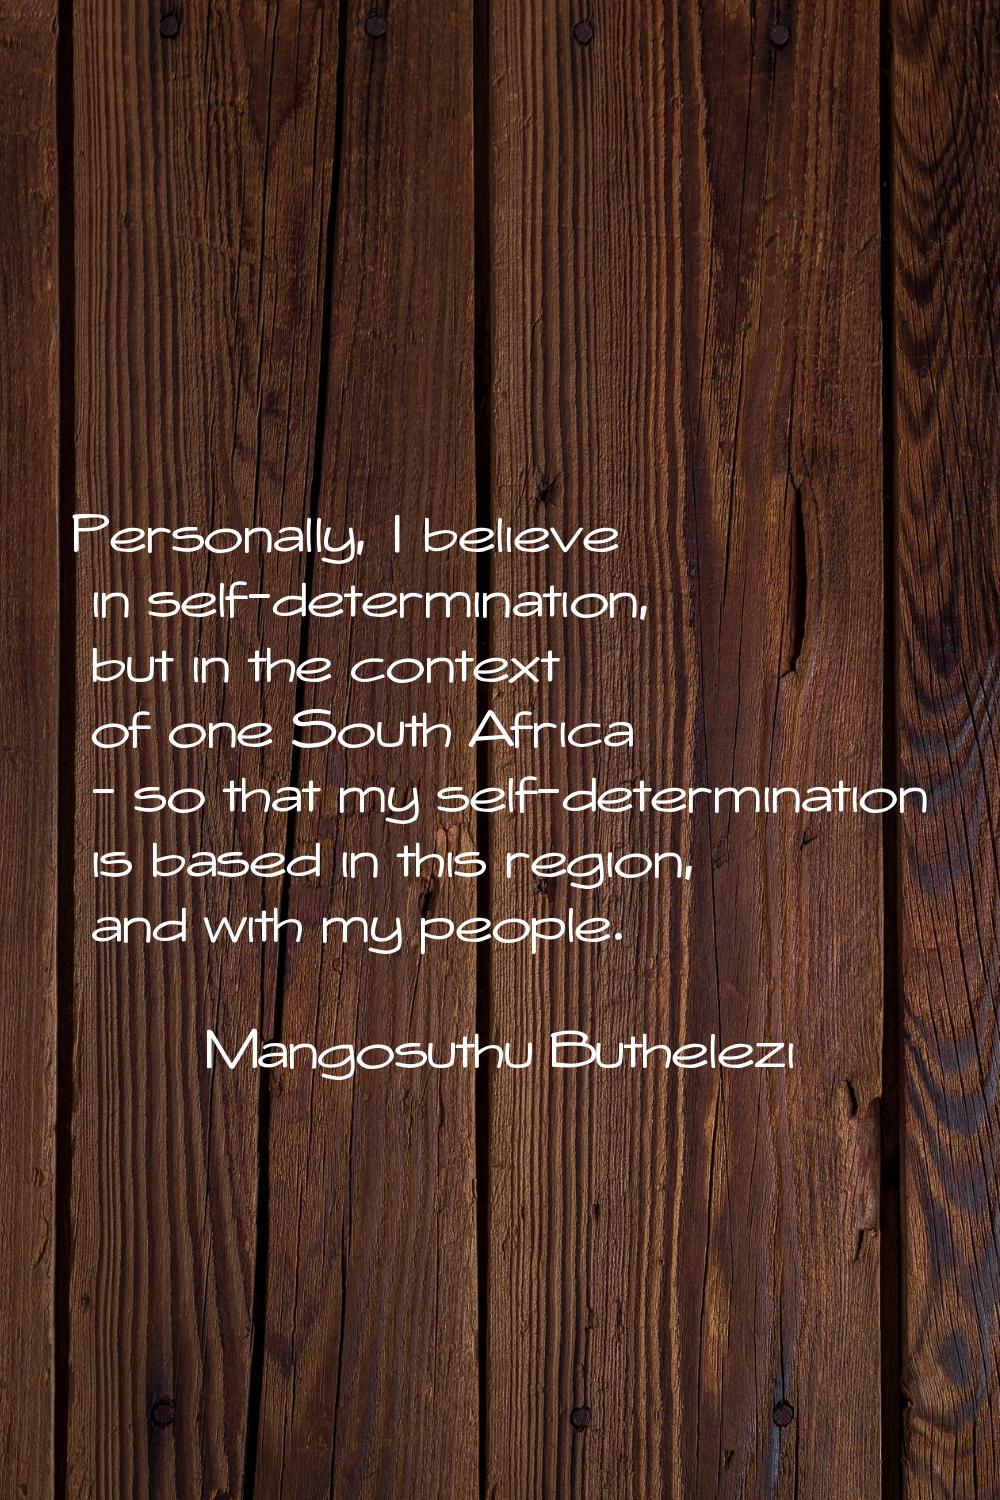 Personally, I believe in self-determination, but in the context of one South Africa - so that my se